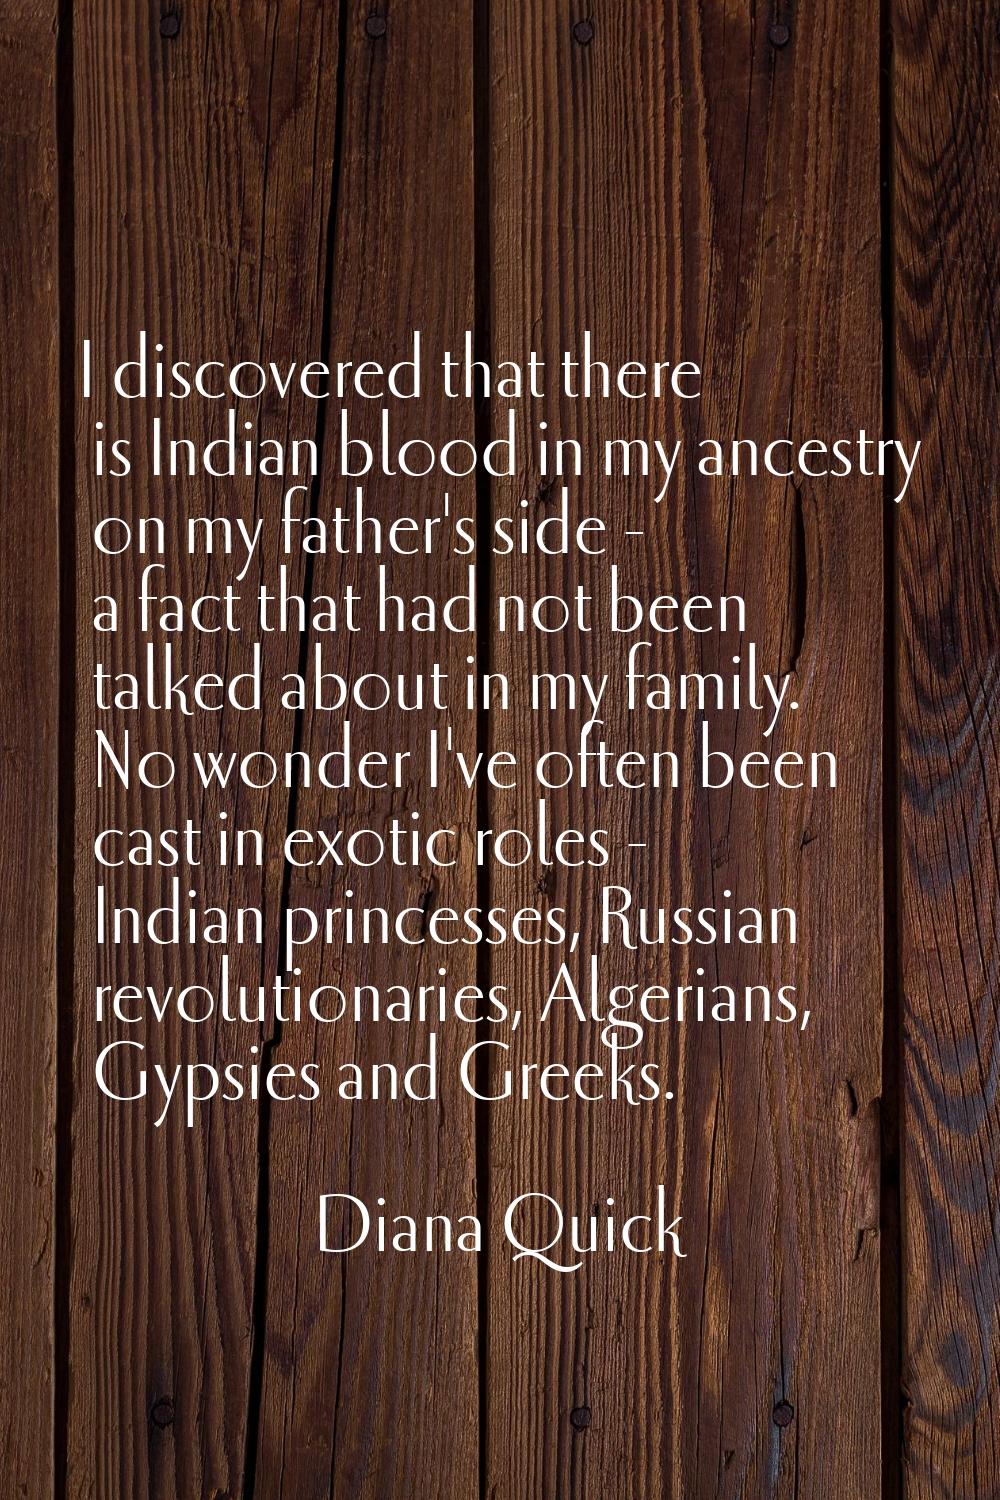 I discovered that there is Indian blood in my ancestry on my father's side - a fact that had not be